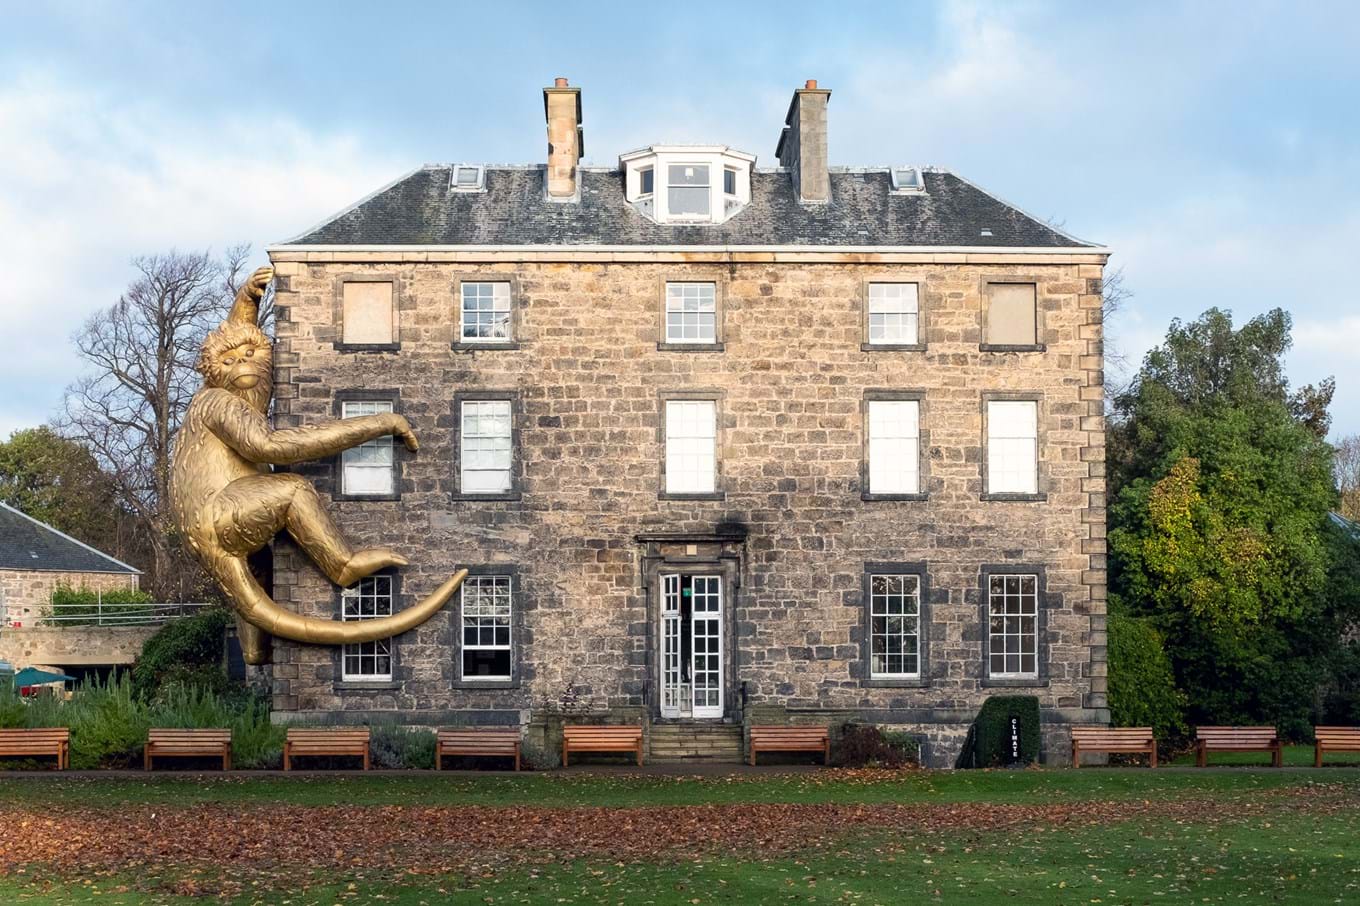 And finally... 45ft Golden Monkey scales Inverleith House